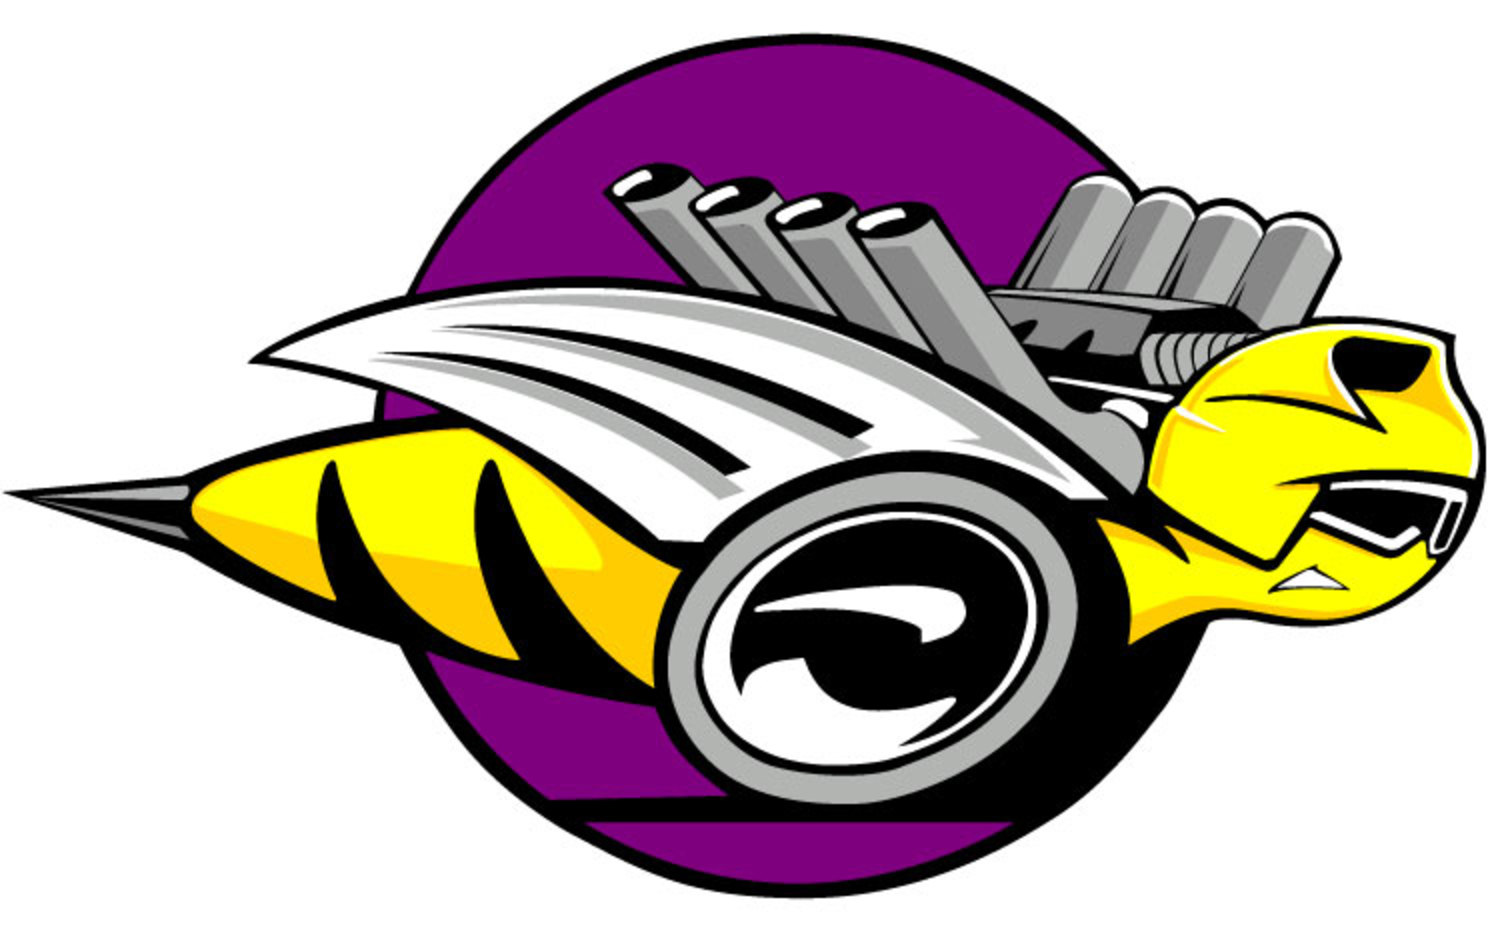 Dodge Rumble Bee logo. The Dodge Ram Rumble Bee is the truck remake of the